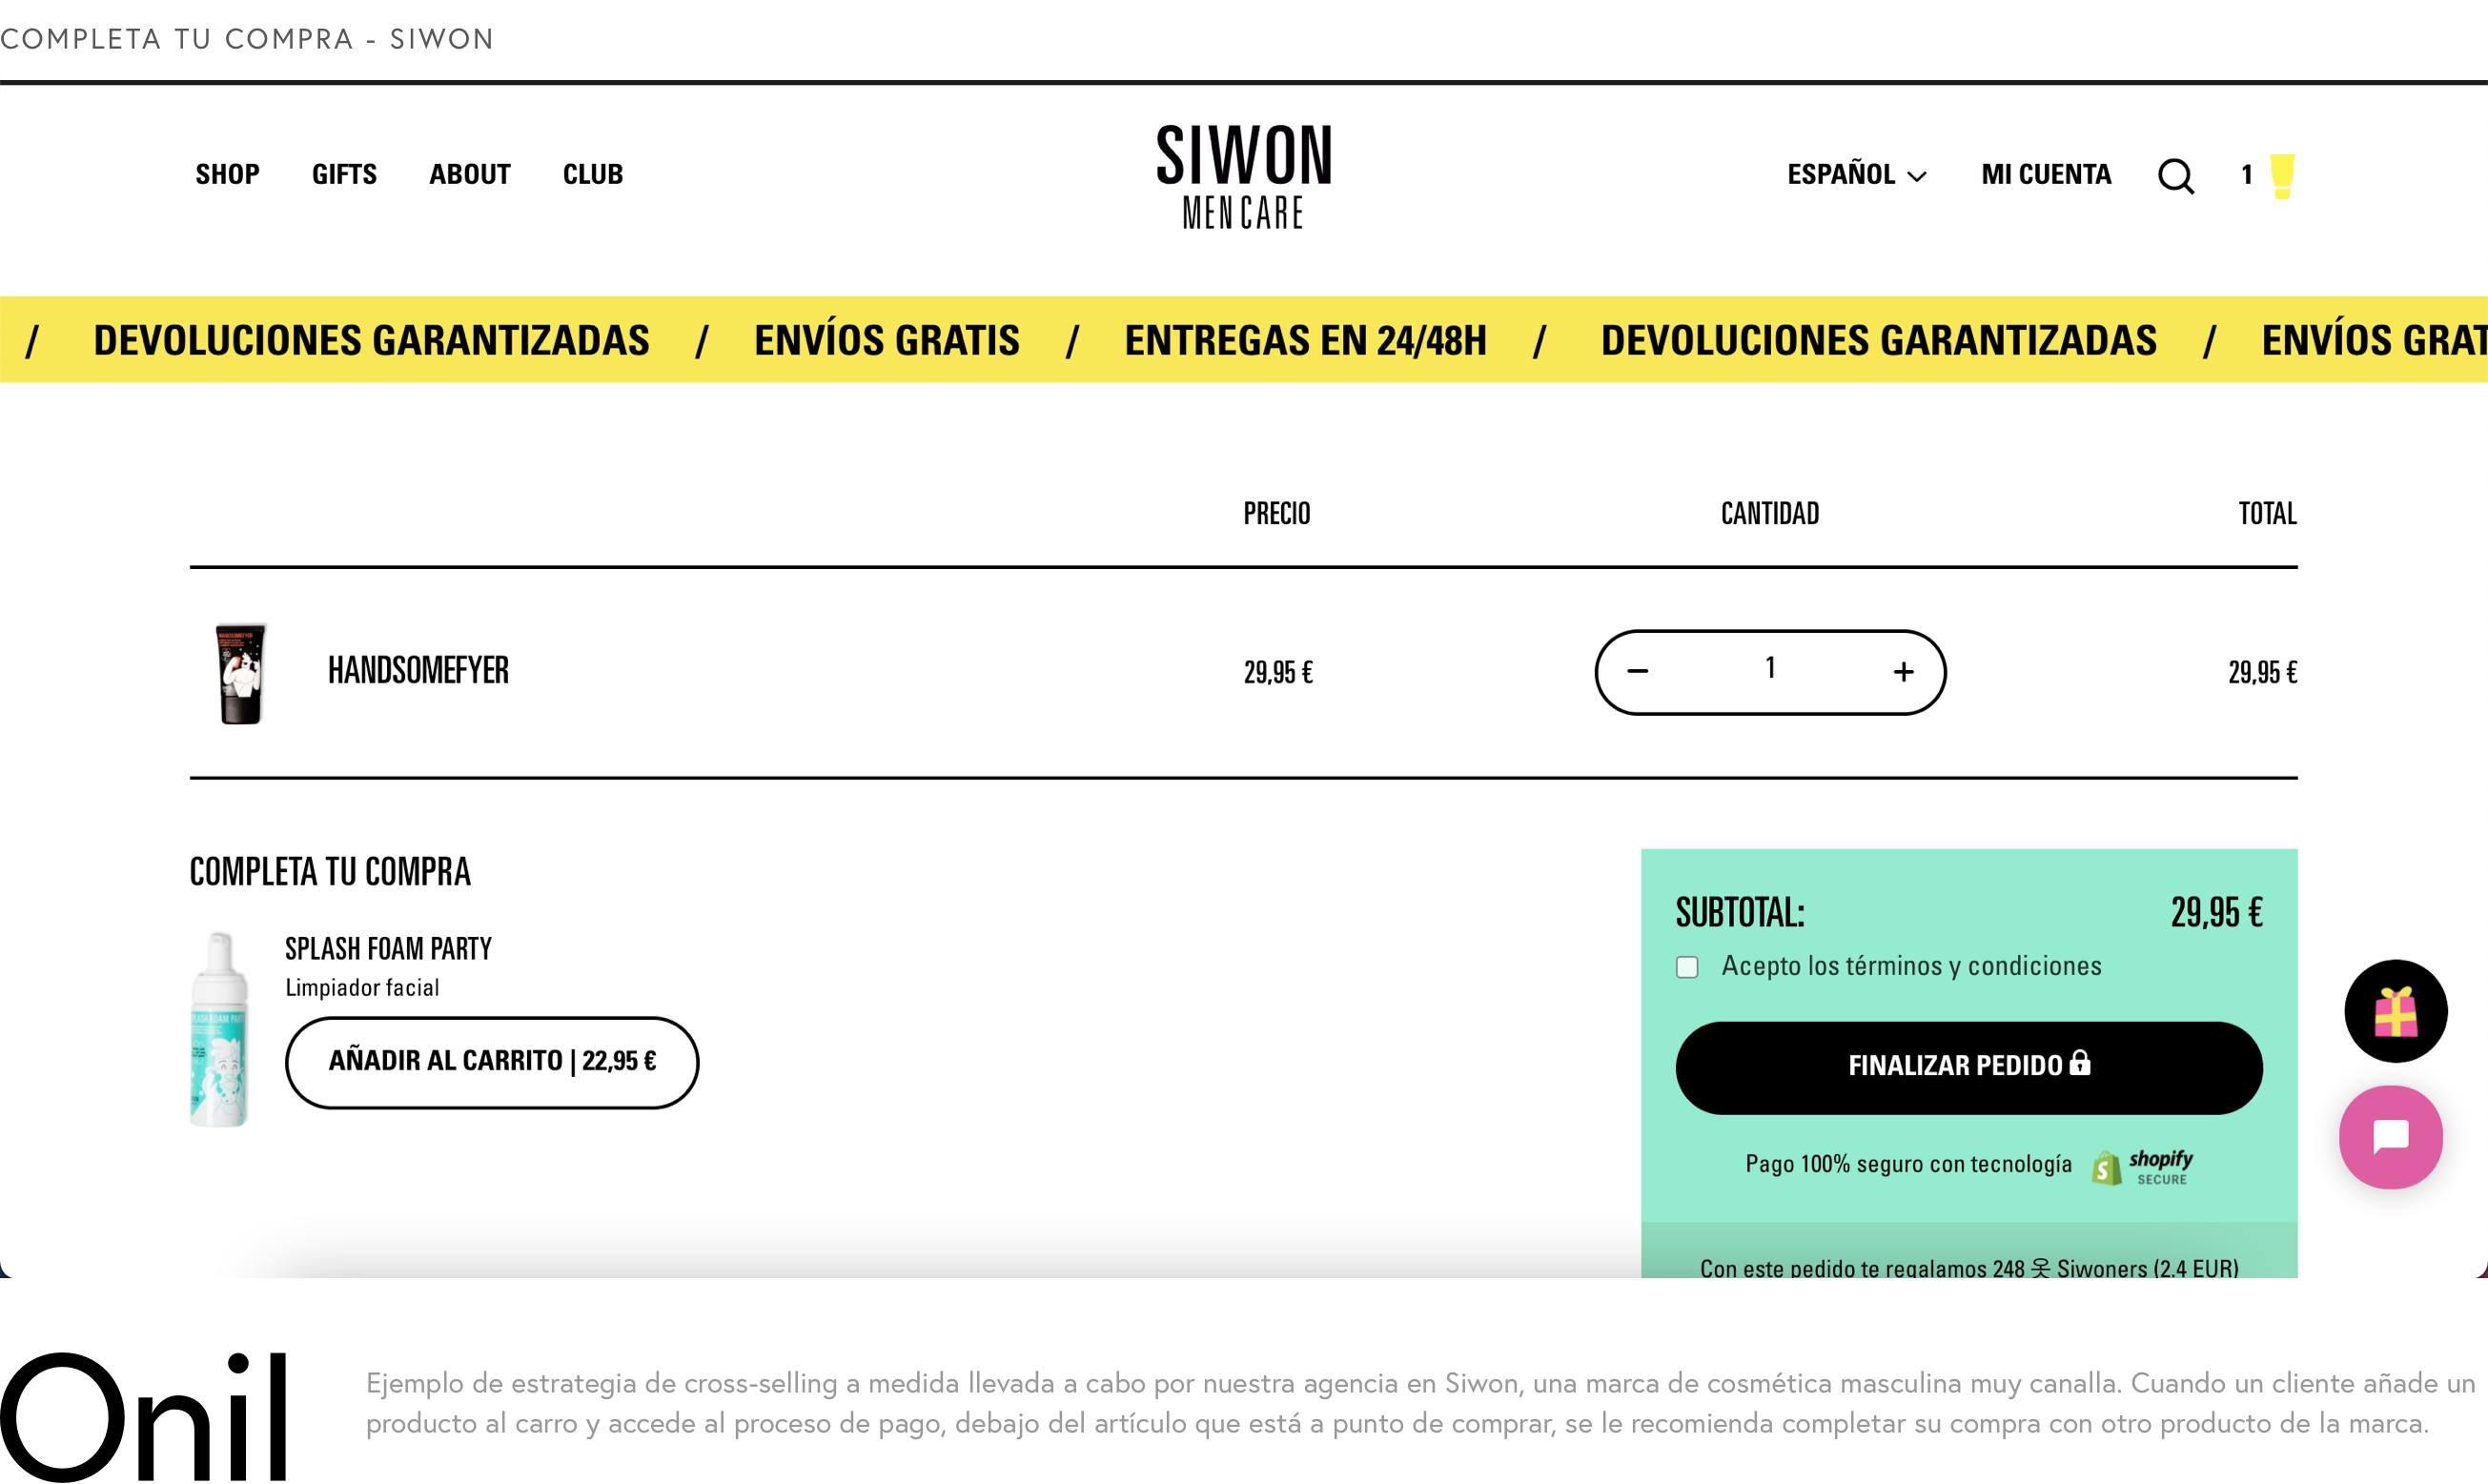 Complete your purchase - Siwon